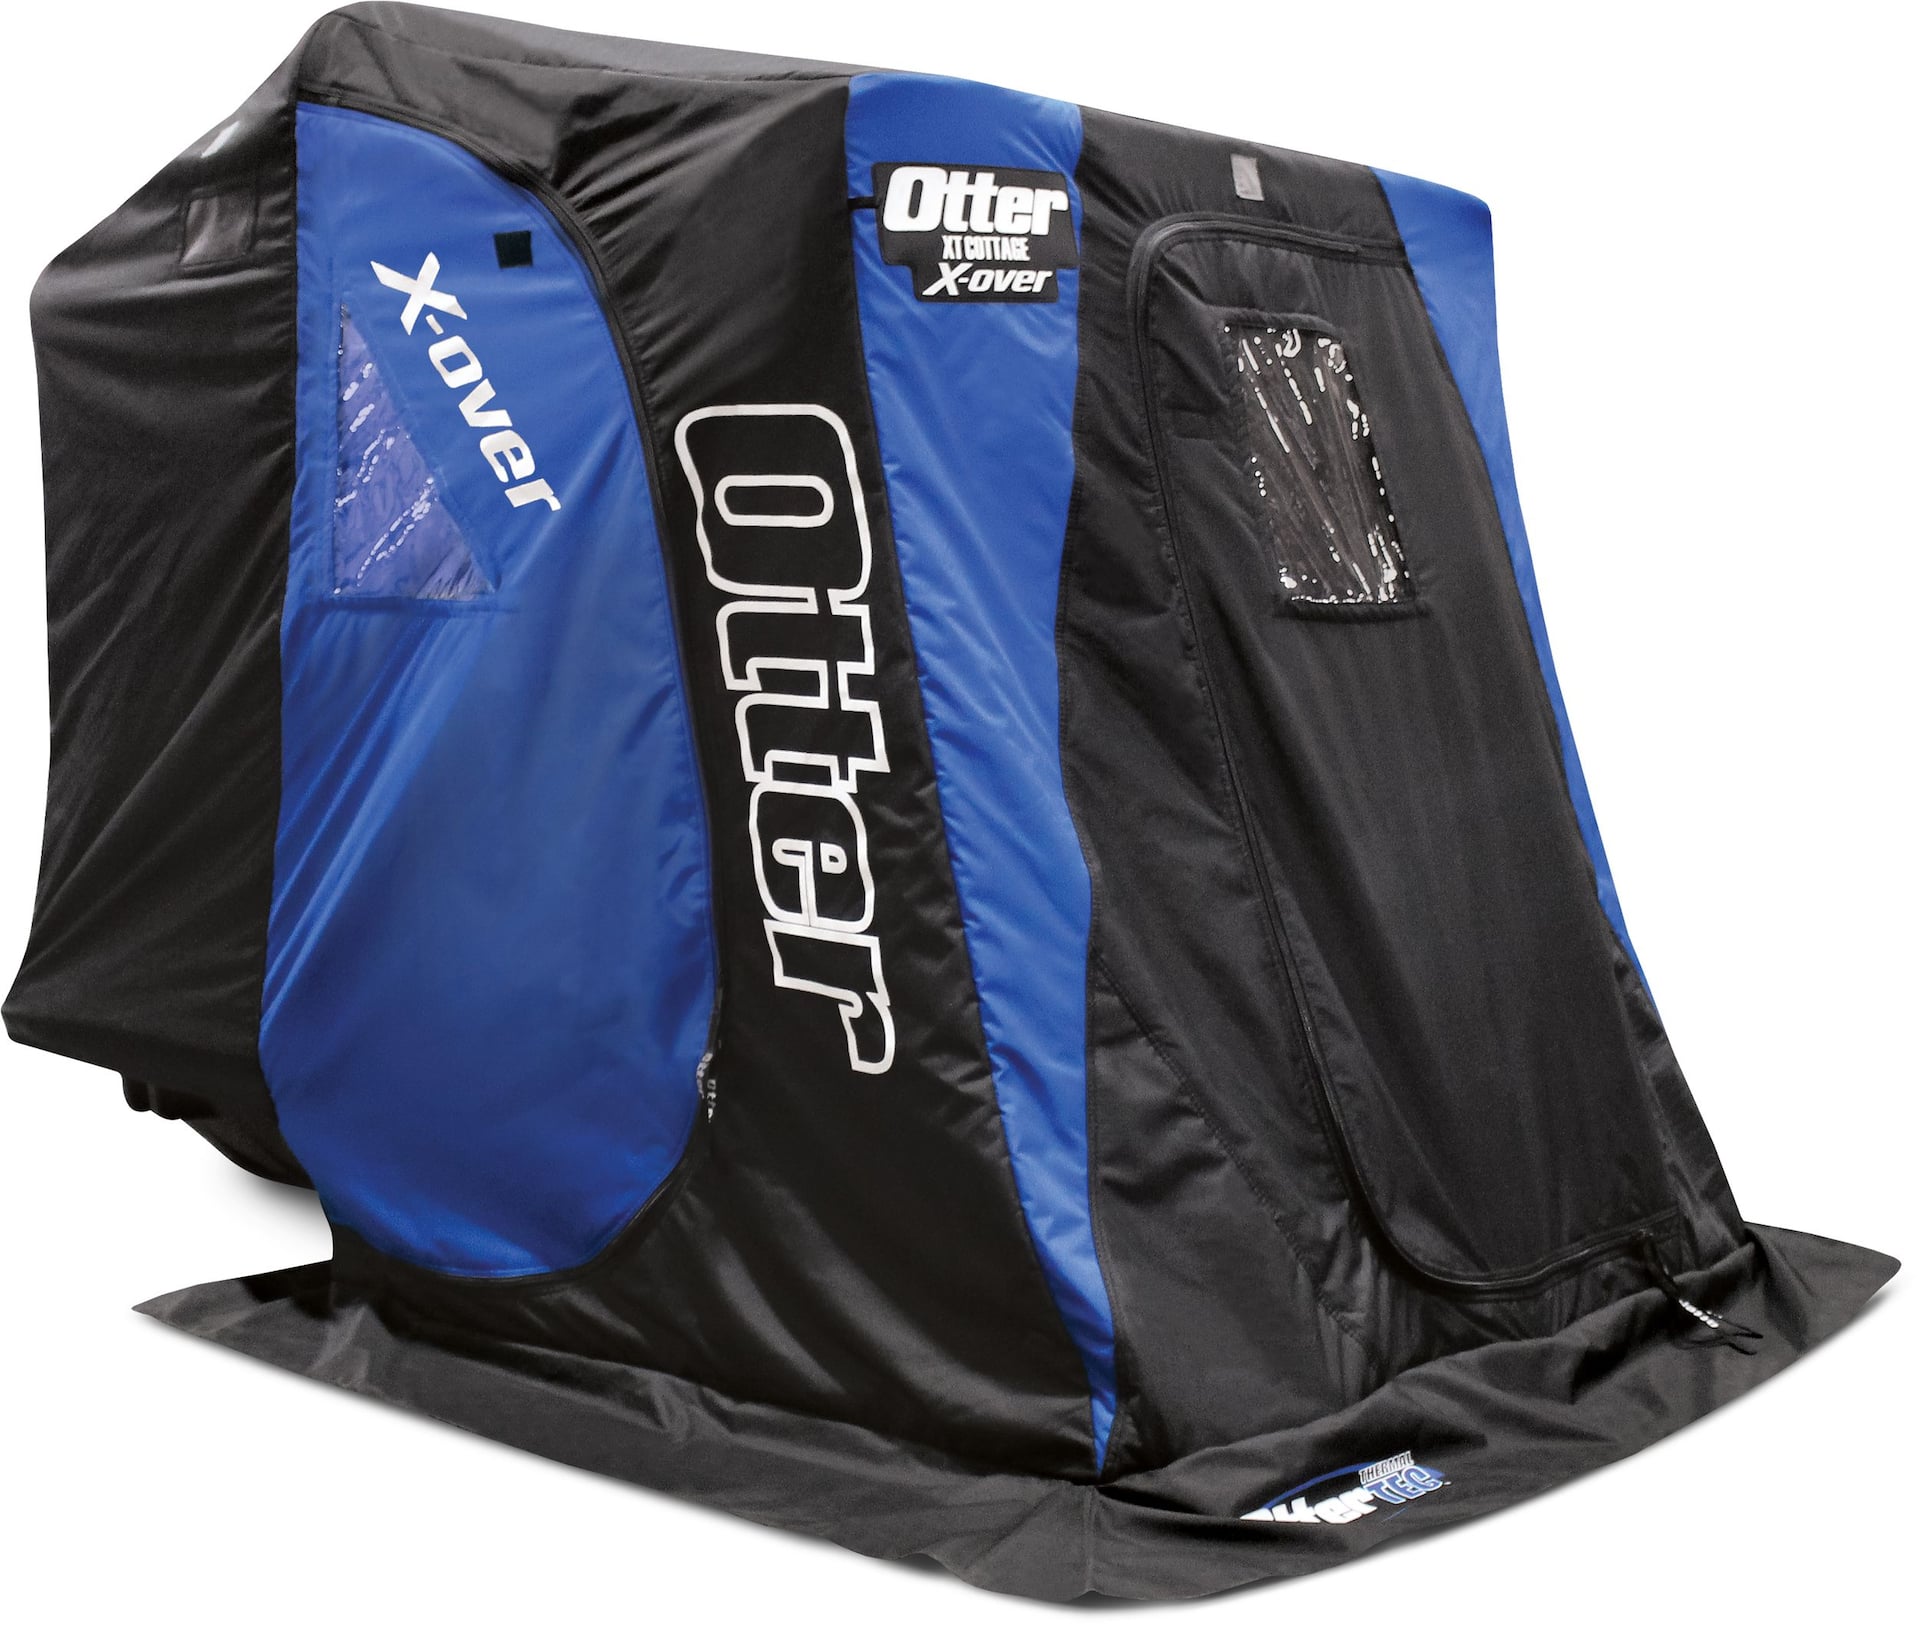  OTTER XT Cabin X-Over Shelter Package 201176 : Patio, Lawn &  Garden